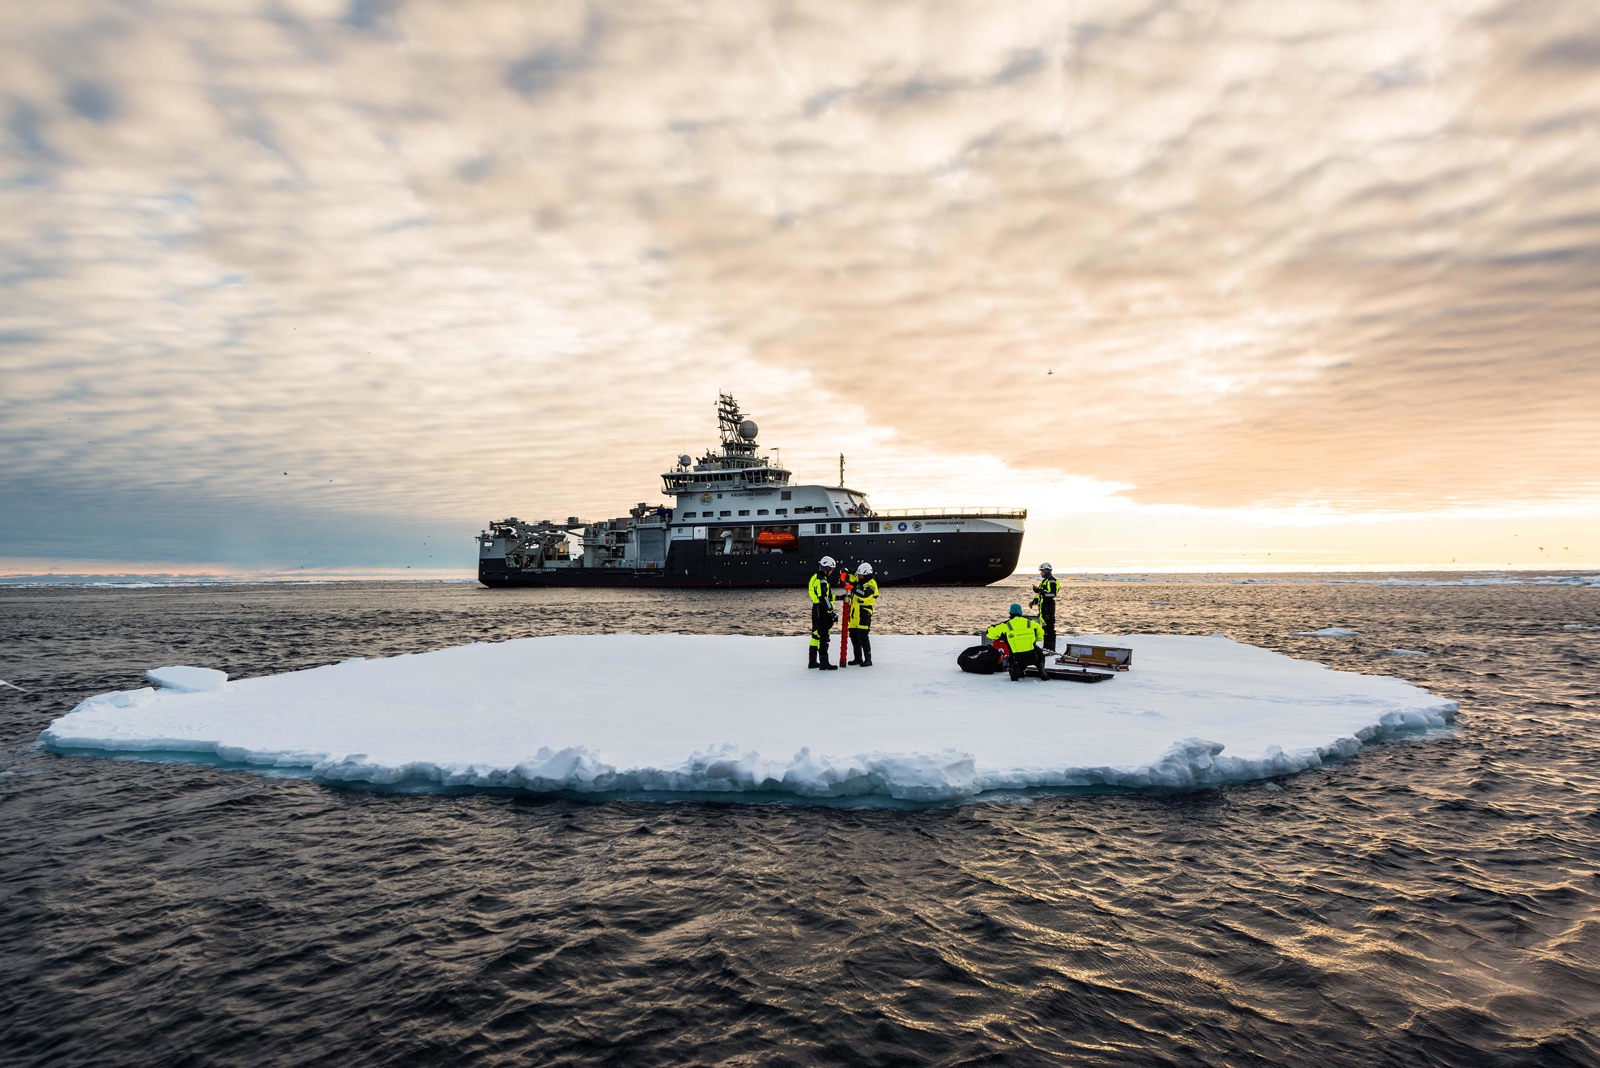 Built according to Polar Class 3 and meeting the Polar Code, the ship is used jointly by the Norwegian Polar Institute, the Institute of Marine Research, and the University of Tromsø, in the Arctic and Antarctic.